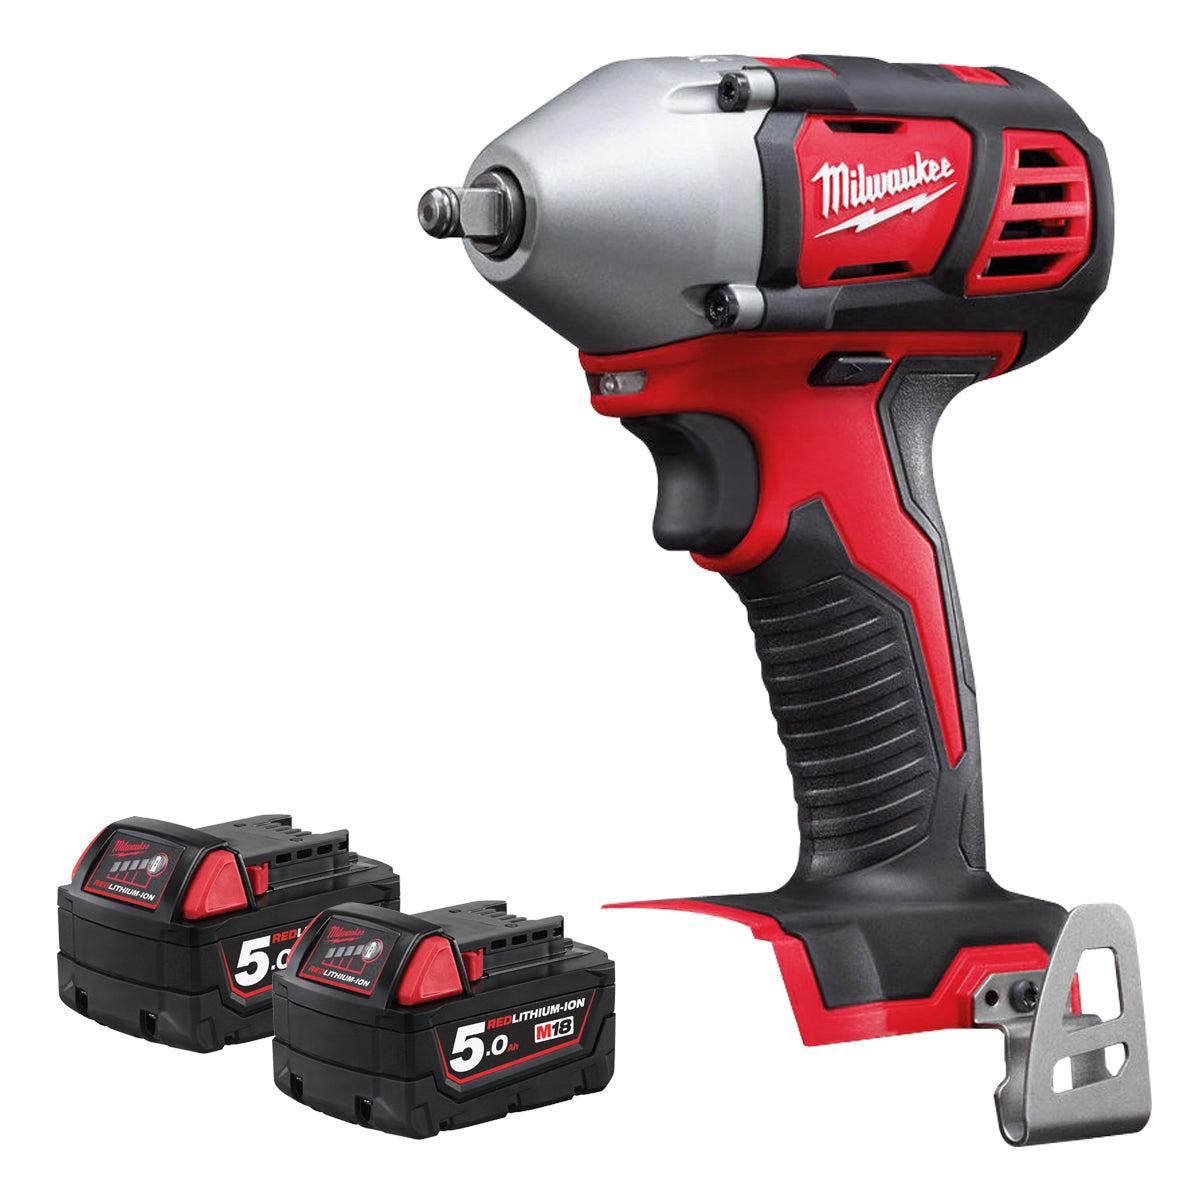 Milwaukee M18BIW38-0 18V 3/8" Compact Impact Wrench with 2 x 5.0Ah Batteries